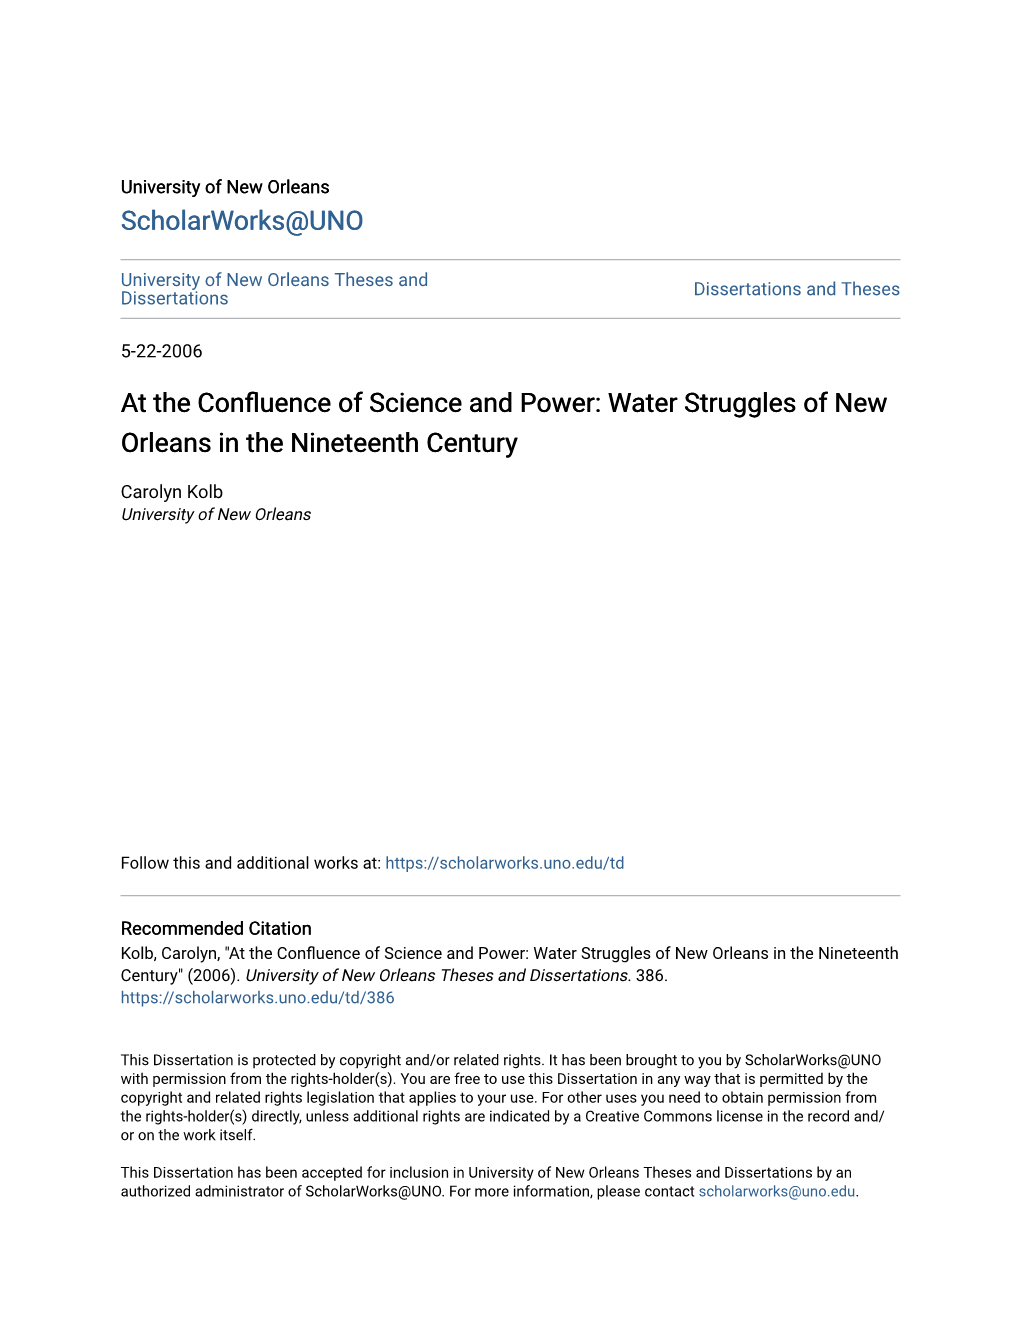 Water Struggles of New Orleans in the Nineteenth Century